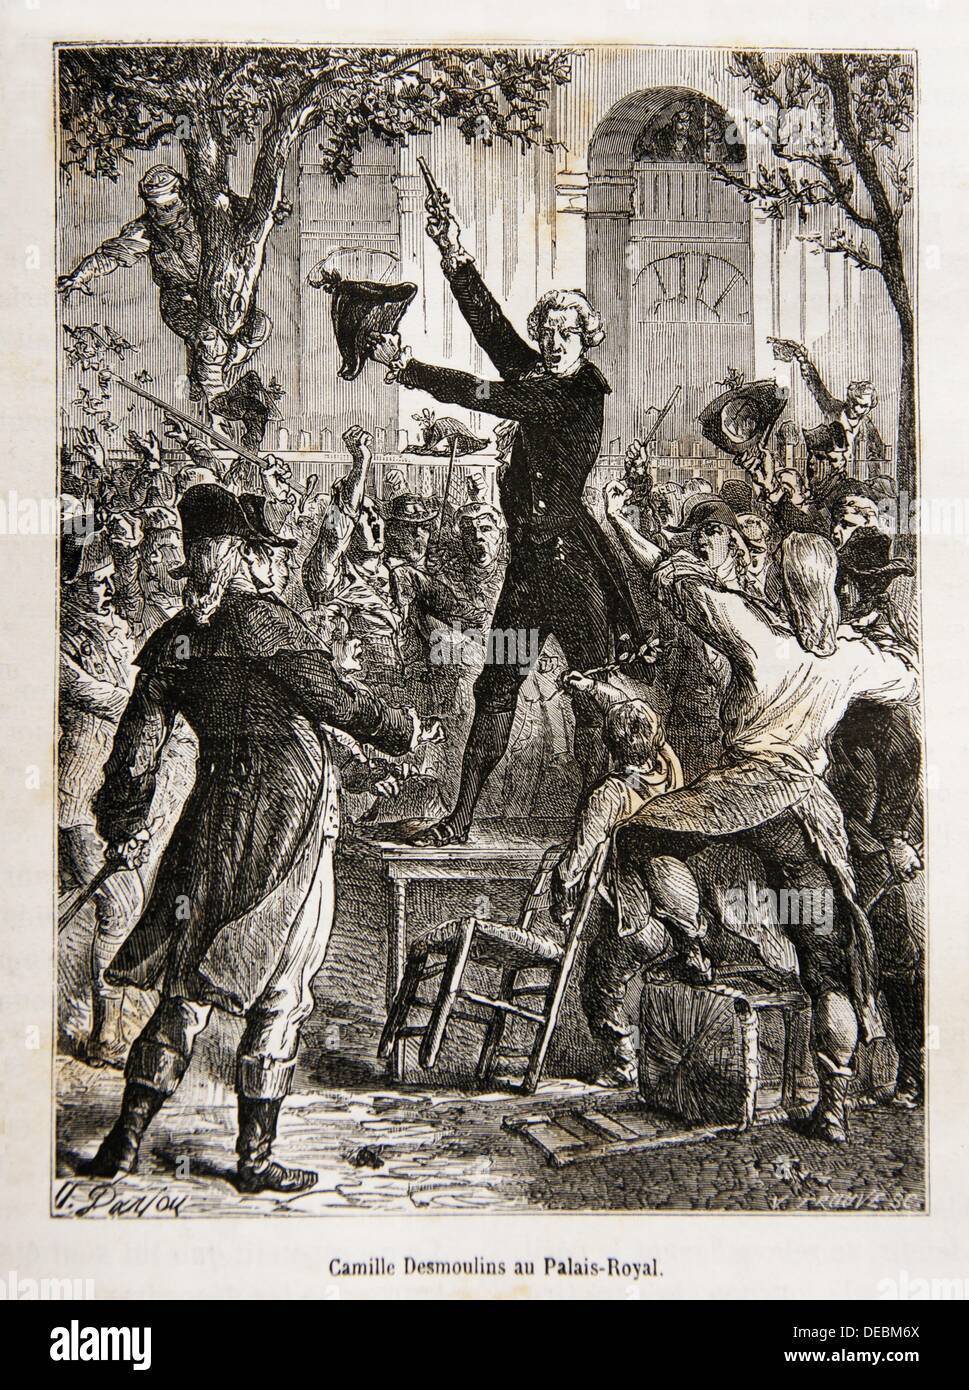 Camille Desmoulins at the Palais-Royal, French Revolution (18th century), Paris, France Stock Photo